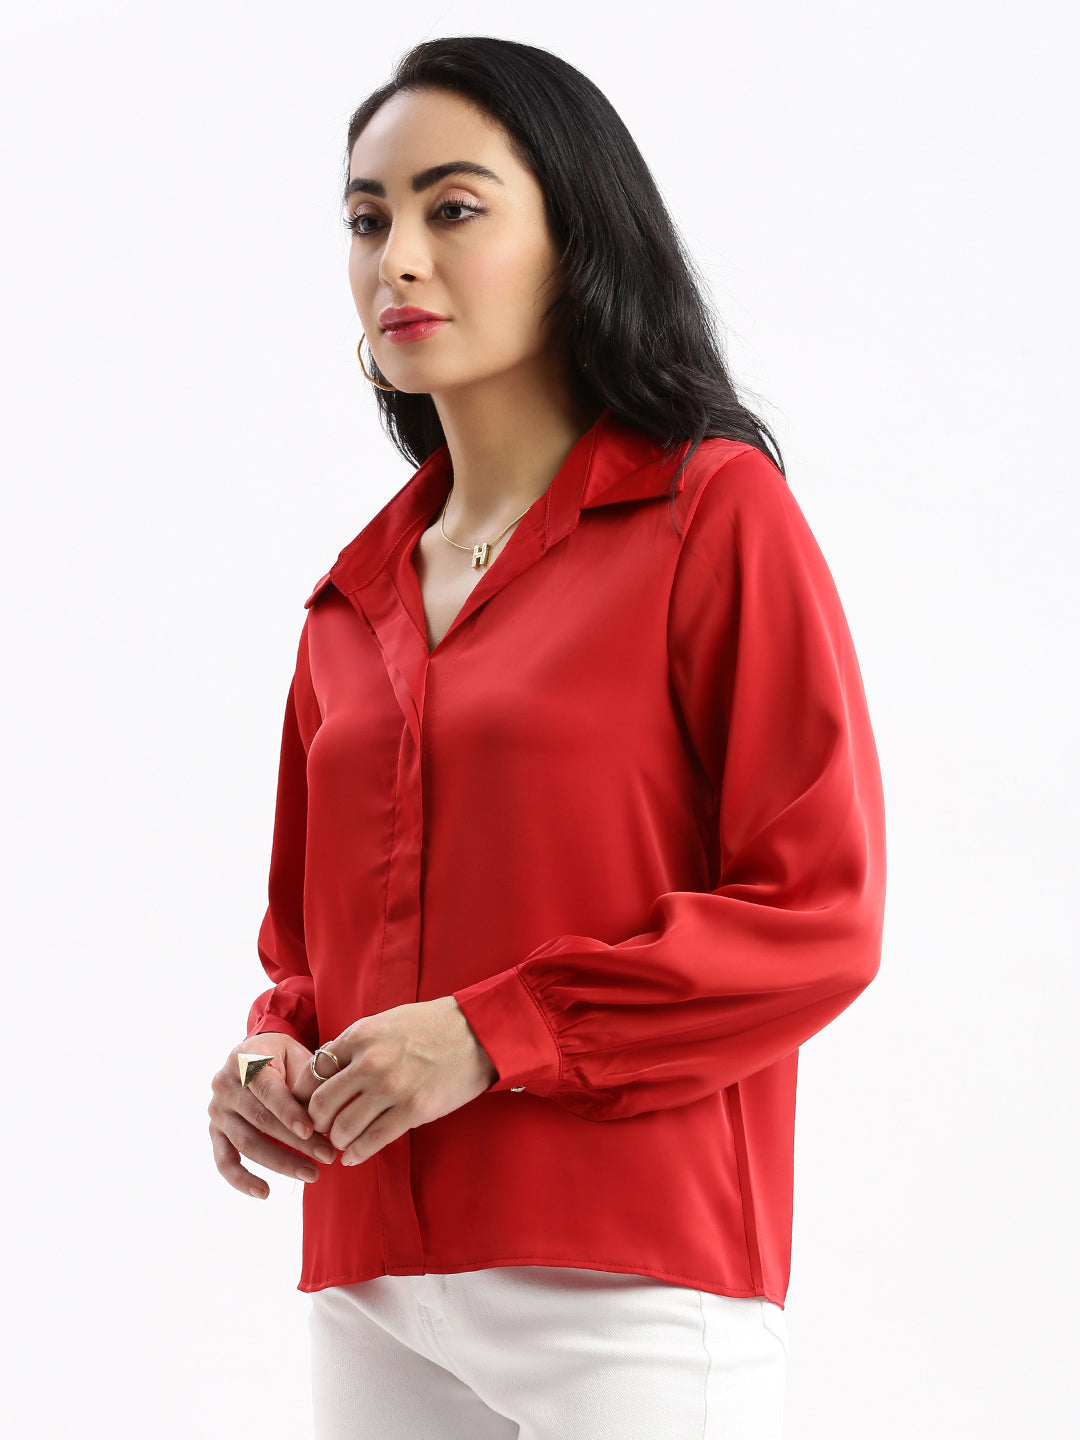 Women Solid Red Top with Neck Chain